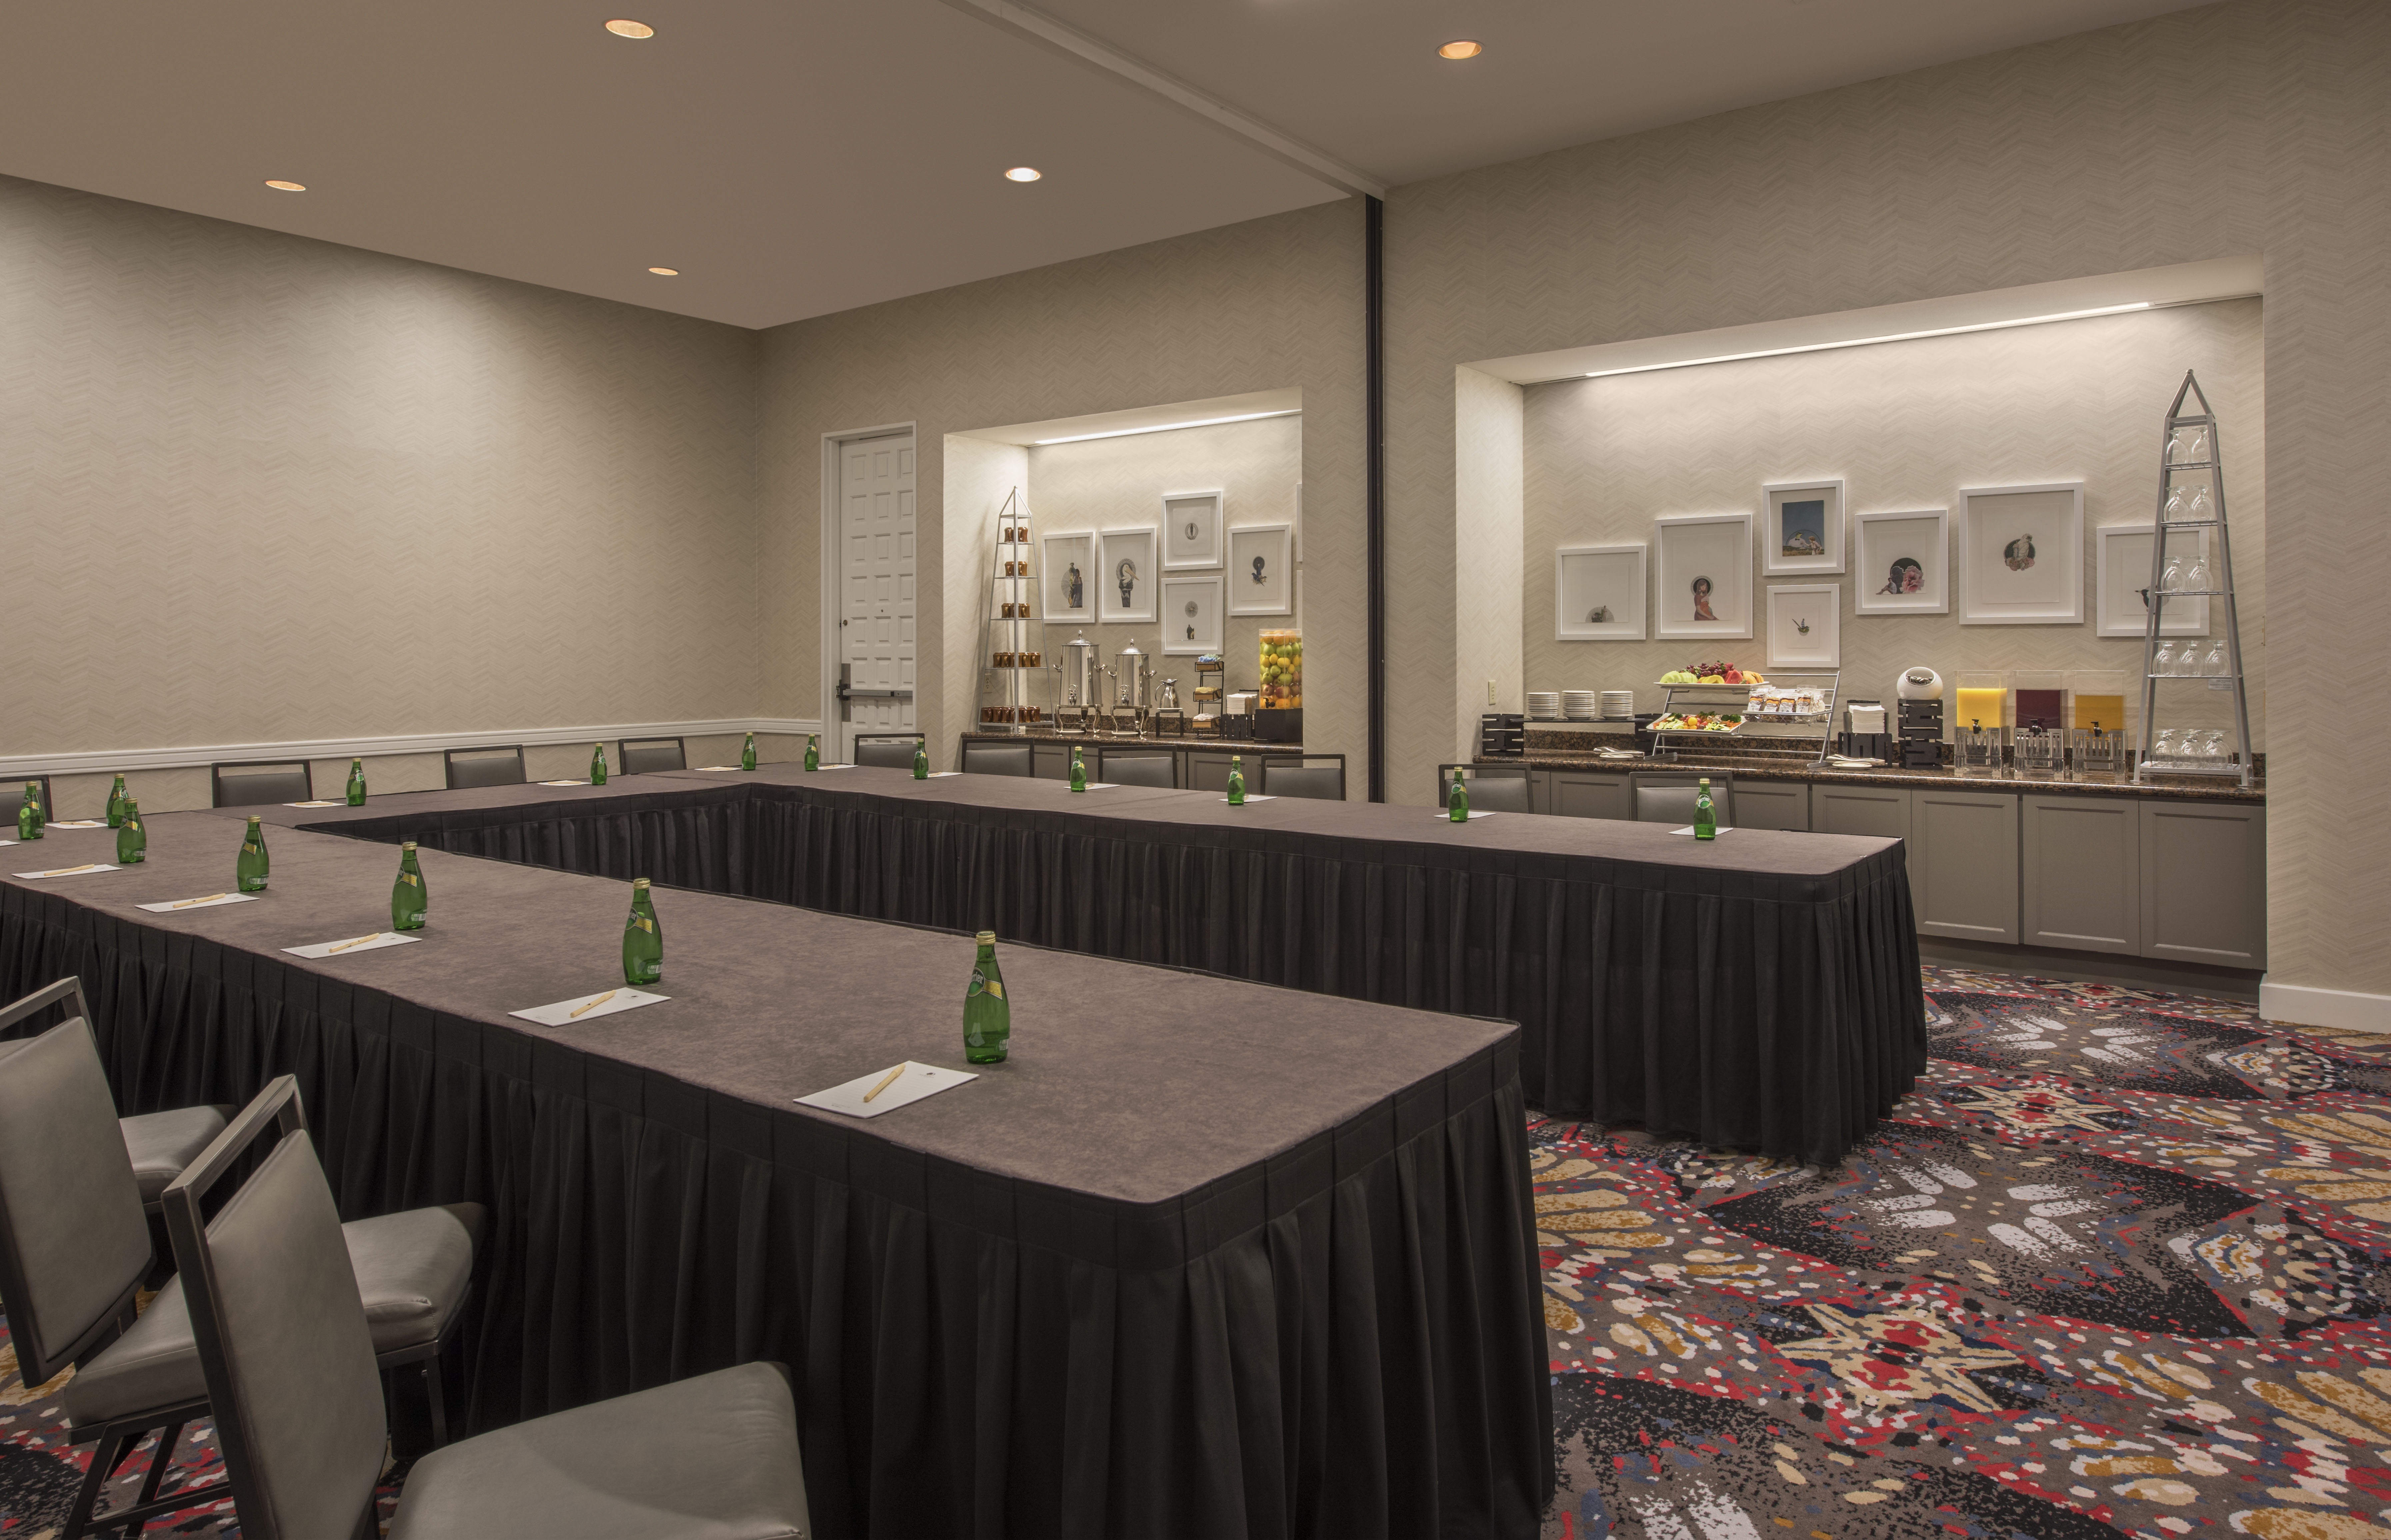 Dewitt Meeting Room With U-Table, Chairs, and Wall Art Above Brightly Lit Refreshment Areas